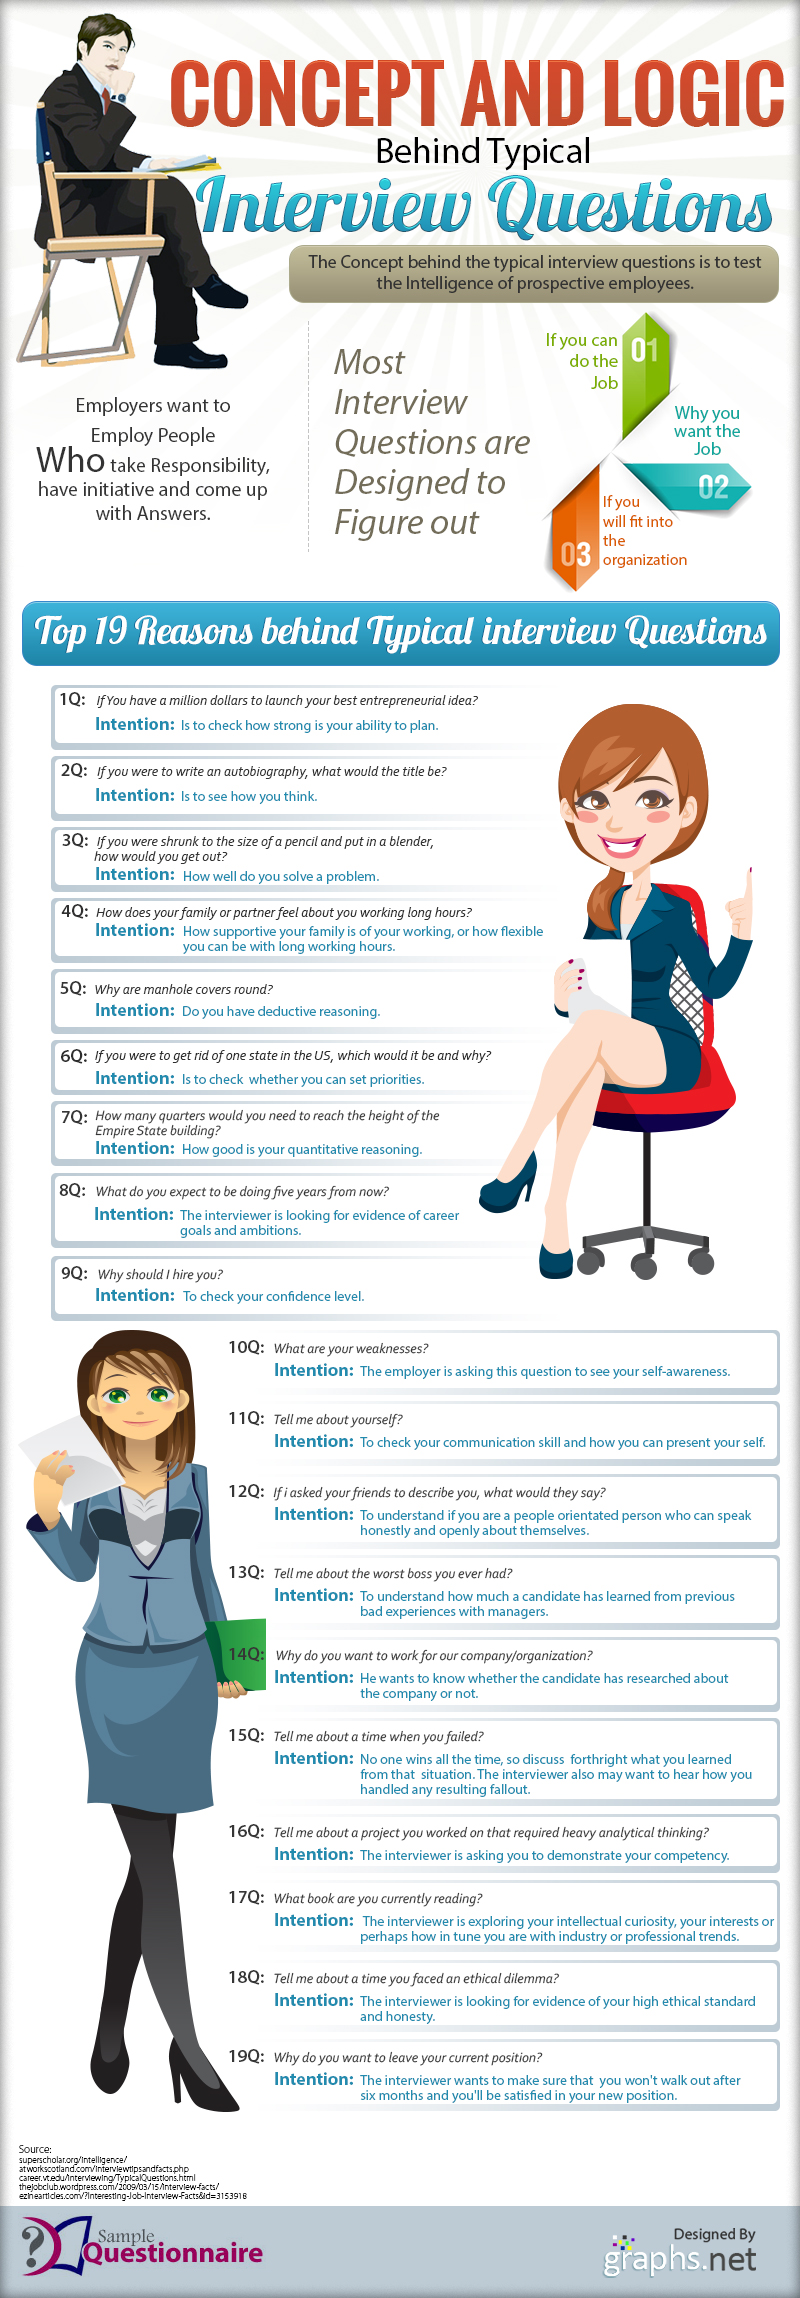 The Logic Behind 19 Common Interview Questions